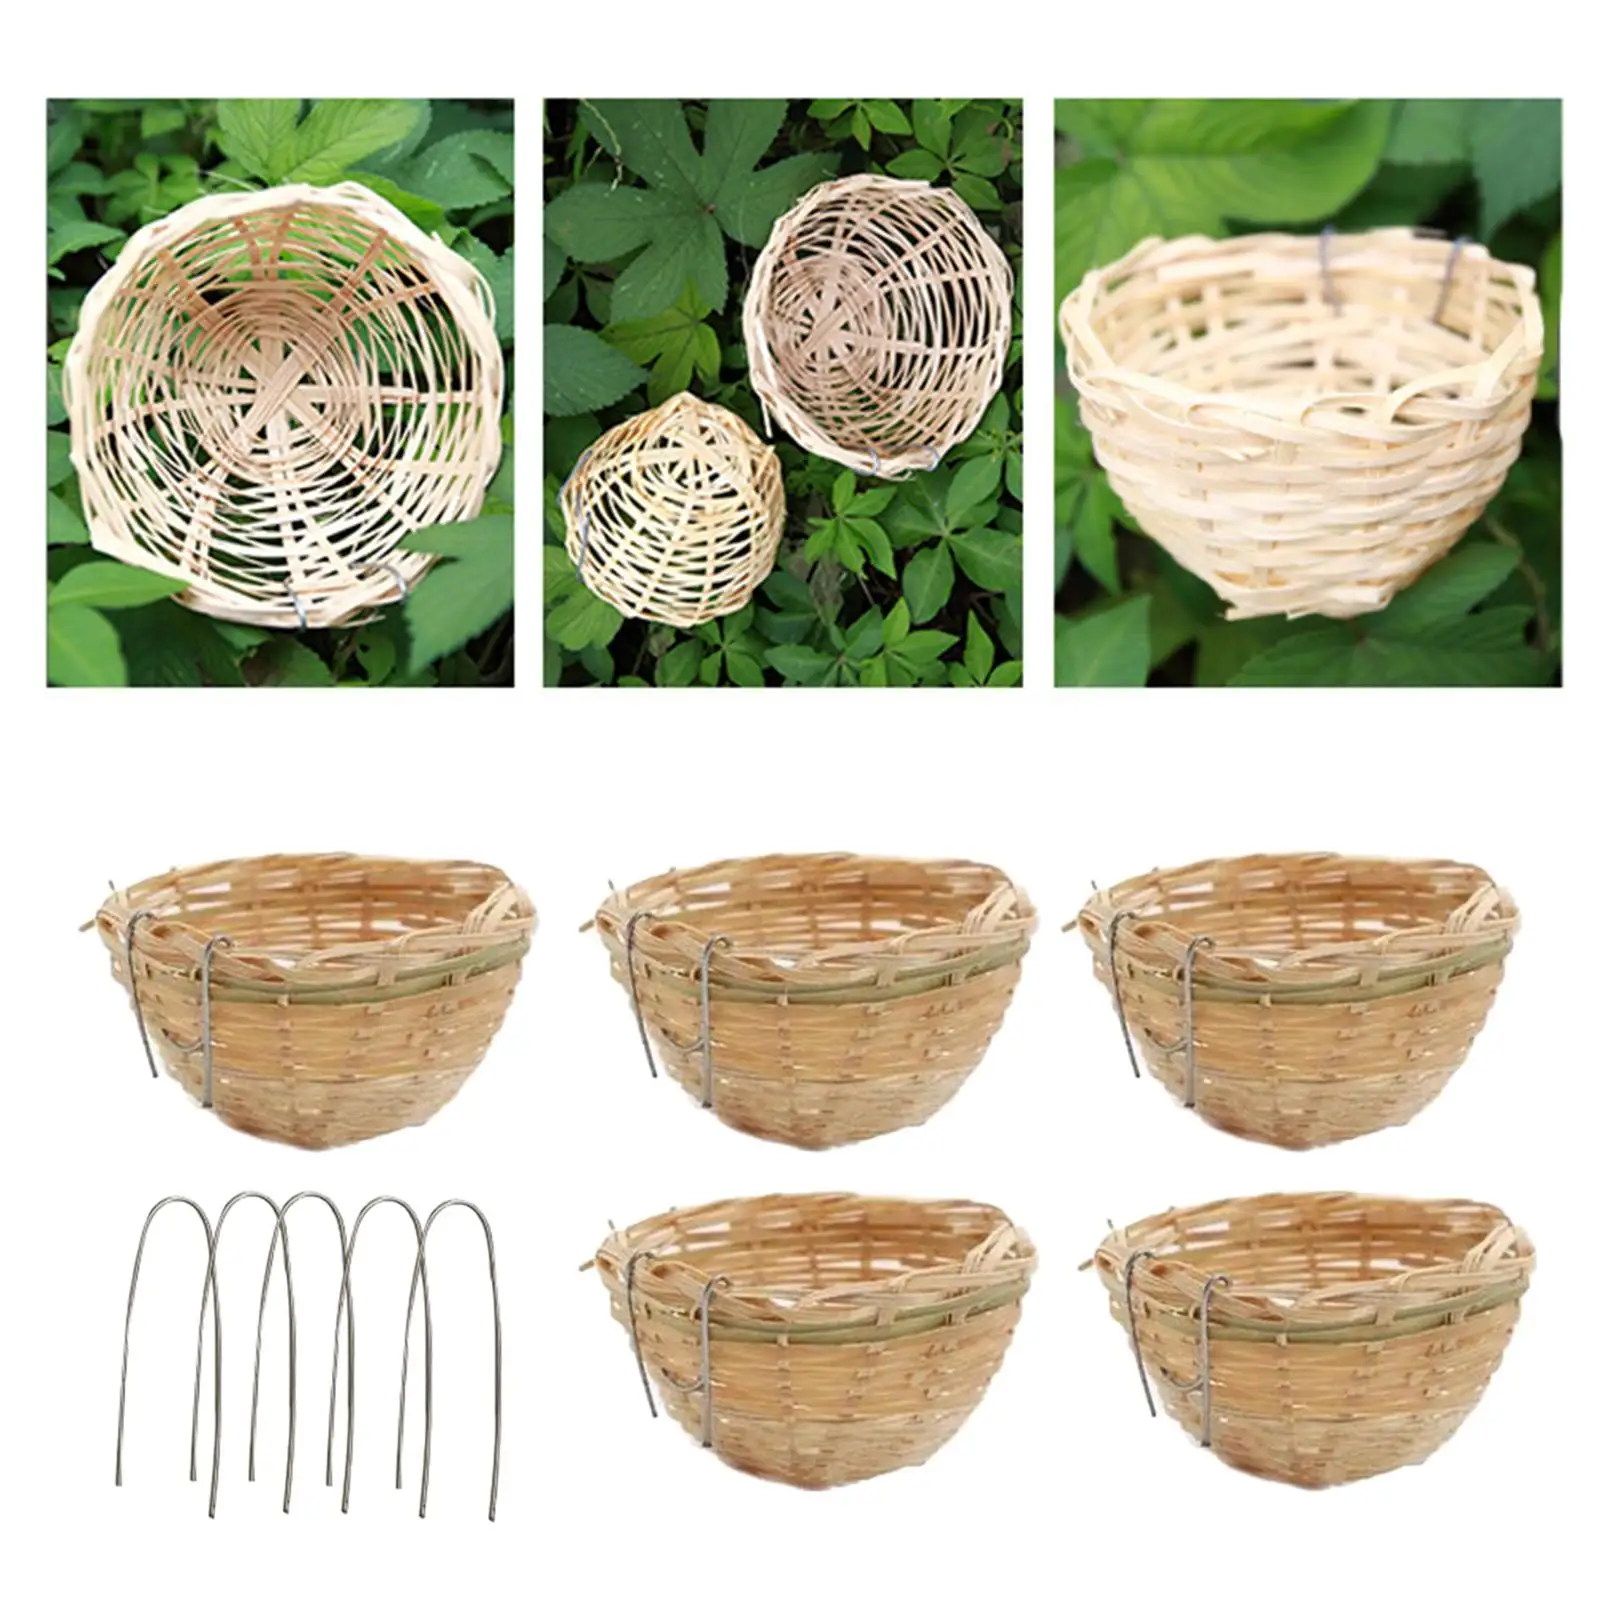 Birdhouse Pet Bedroom Hand Woven Hand Woven Birdhouses Humming Bird Houses for Decoration Lawn Roosting Outdoor Yard Lovebirds